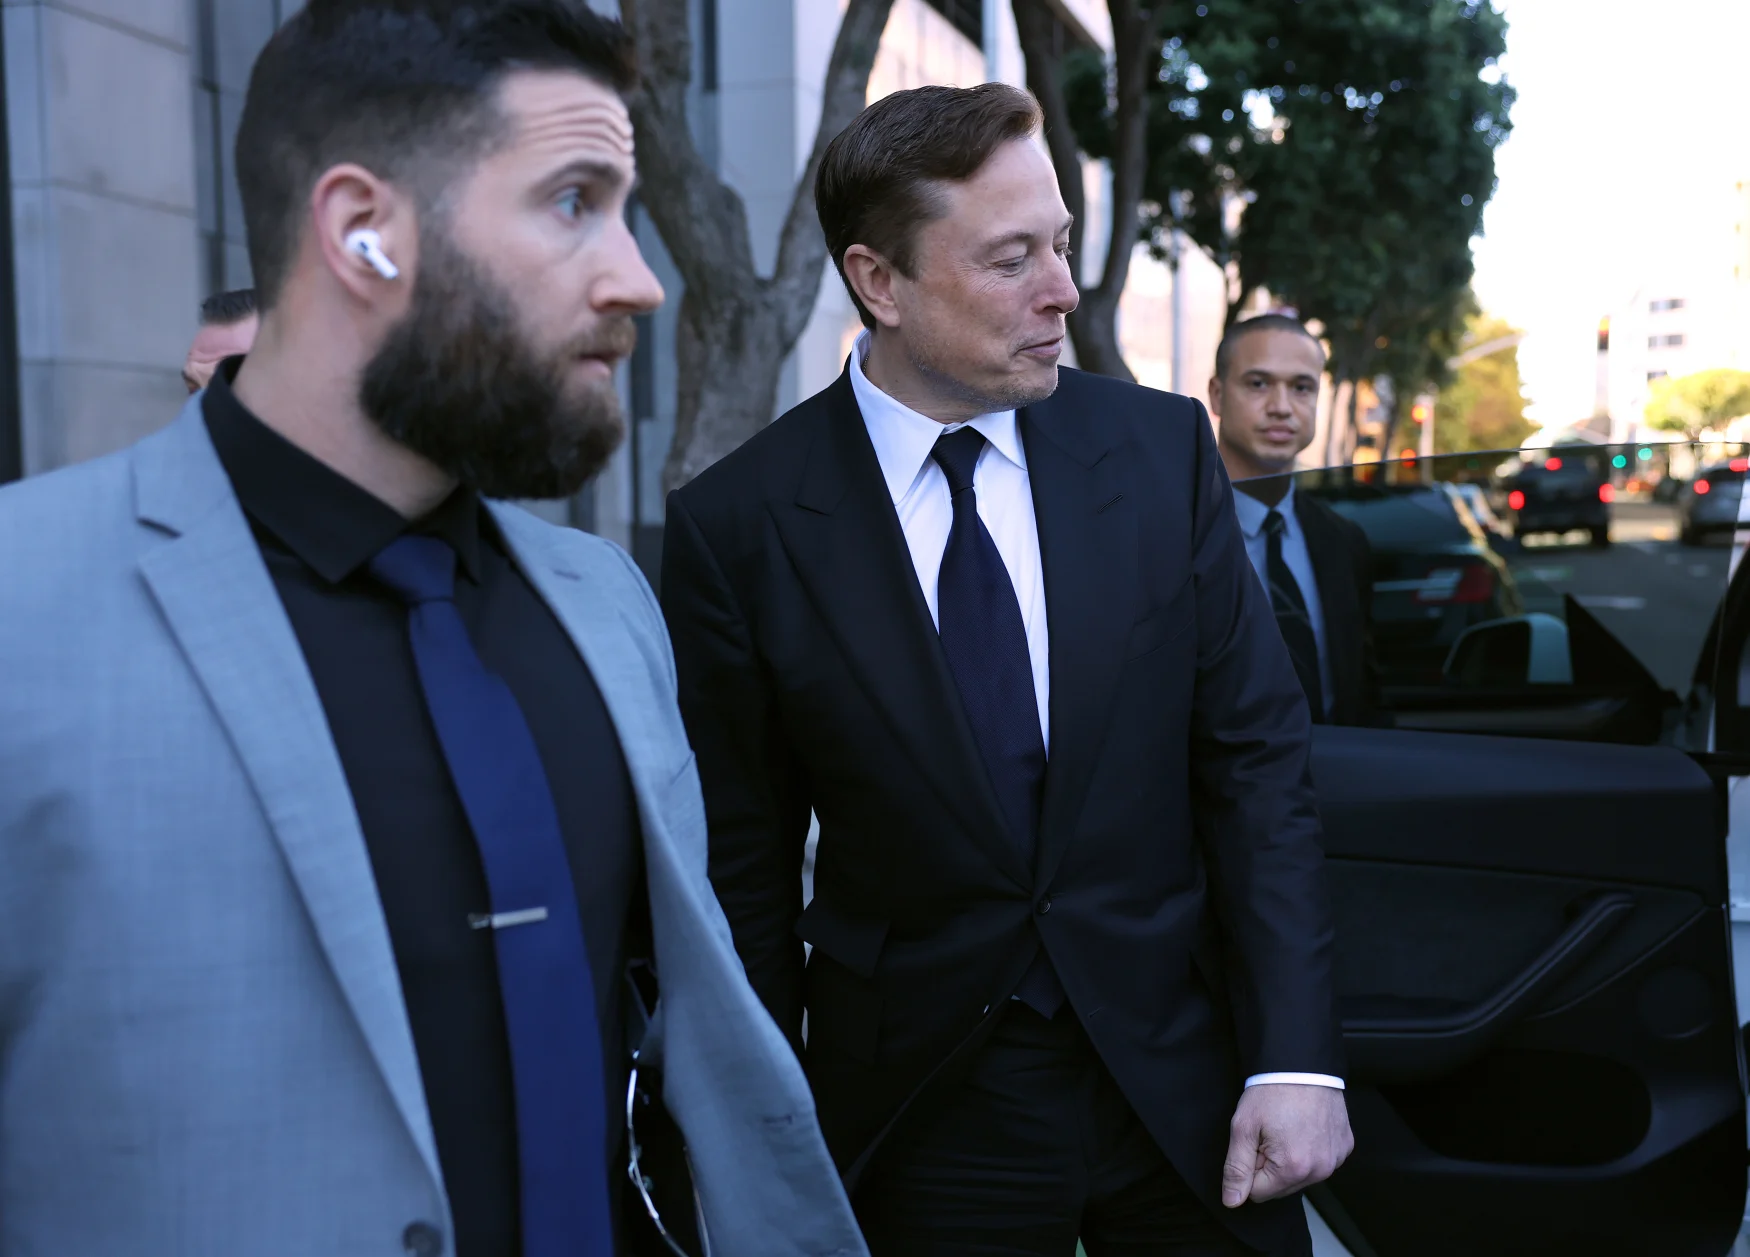 SAN FRANCISCO, CALIFORNIA - January 24: Tesla CEO Elon Musk leaves the Phillip Burton Federal Building on January 24, 2023 in San Francisco, California.  In August 2018, Musk testified at trial regarding a lawsuit filed by investors against Tesla and Musk, saying he was taking Tesla private with funds he secured.  The tweet turned out to be false and cost shareholders billions of dollars when Tesla's stock price began fluctuating wildly based on the tweet.  (Photo by Justin Sullivan/Getty Images)